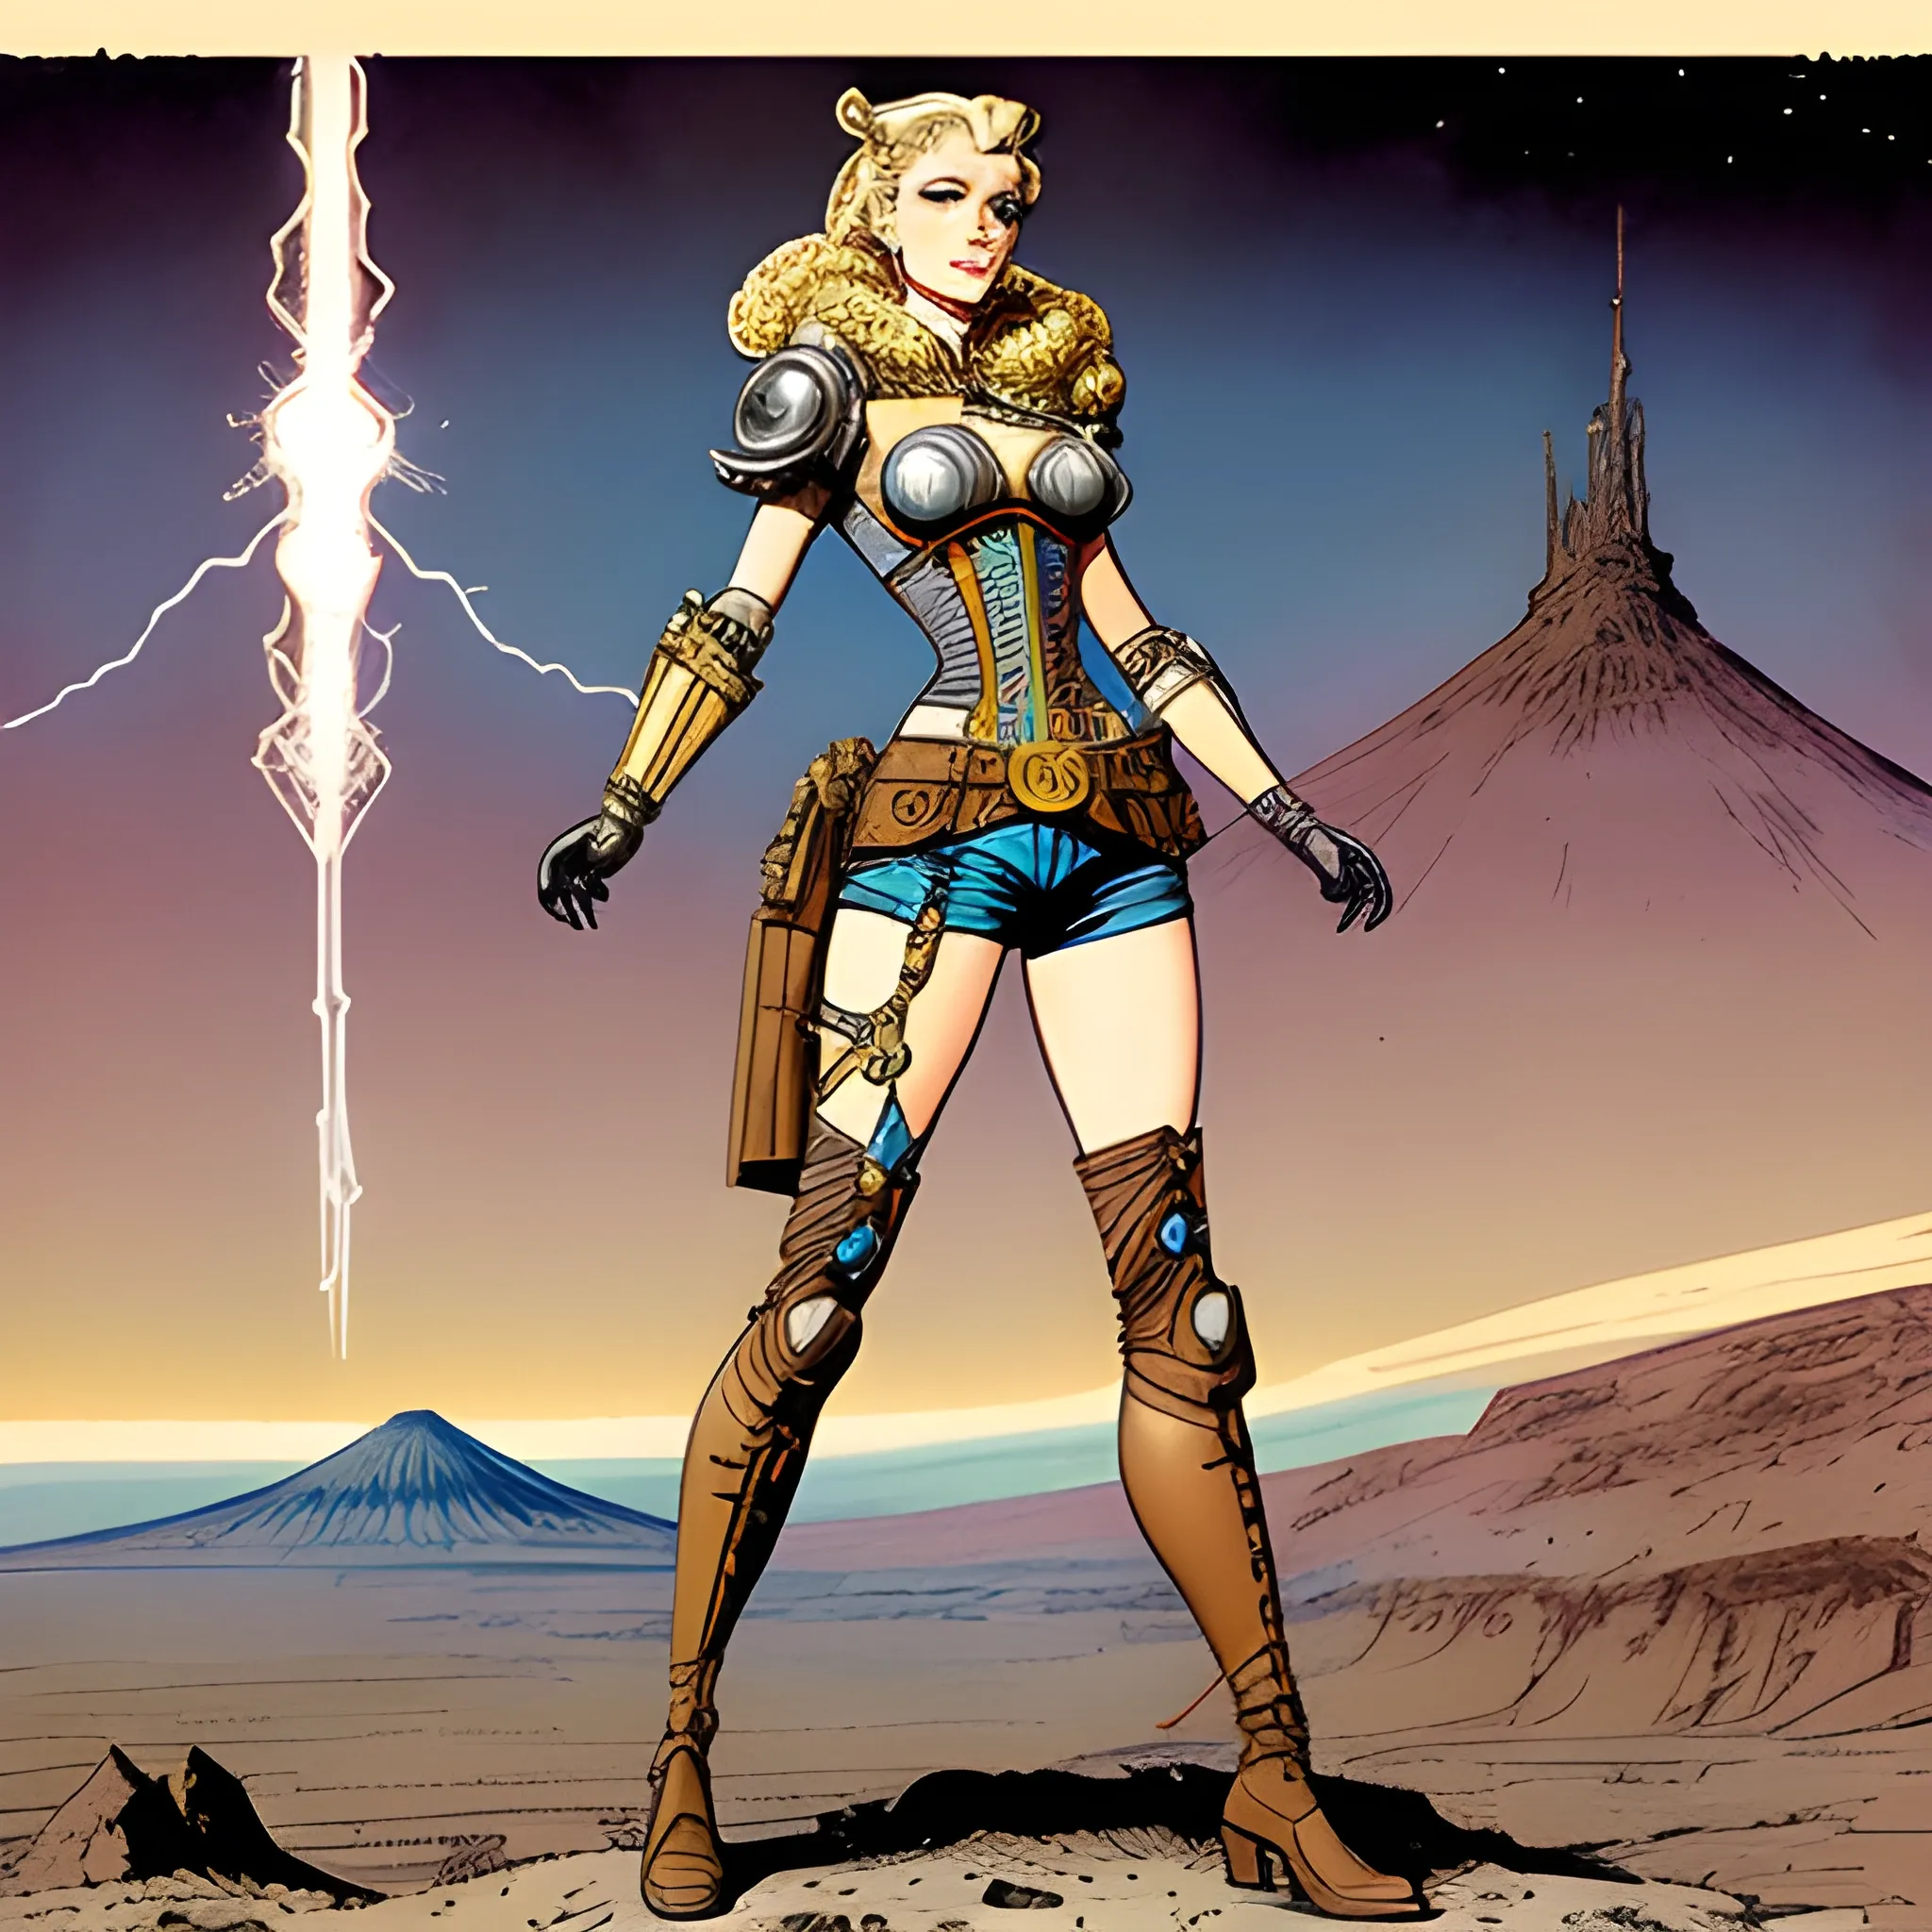 full body character concept art of a steampunk woman engineer | | blonde, illustration by Al Williamson, tan shorts, mount ararat very far away in the background, medieval poster, intricate upper body, lightning fantasy magic,